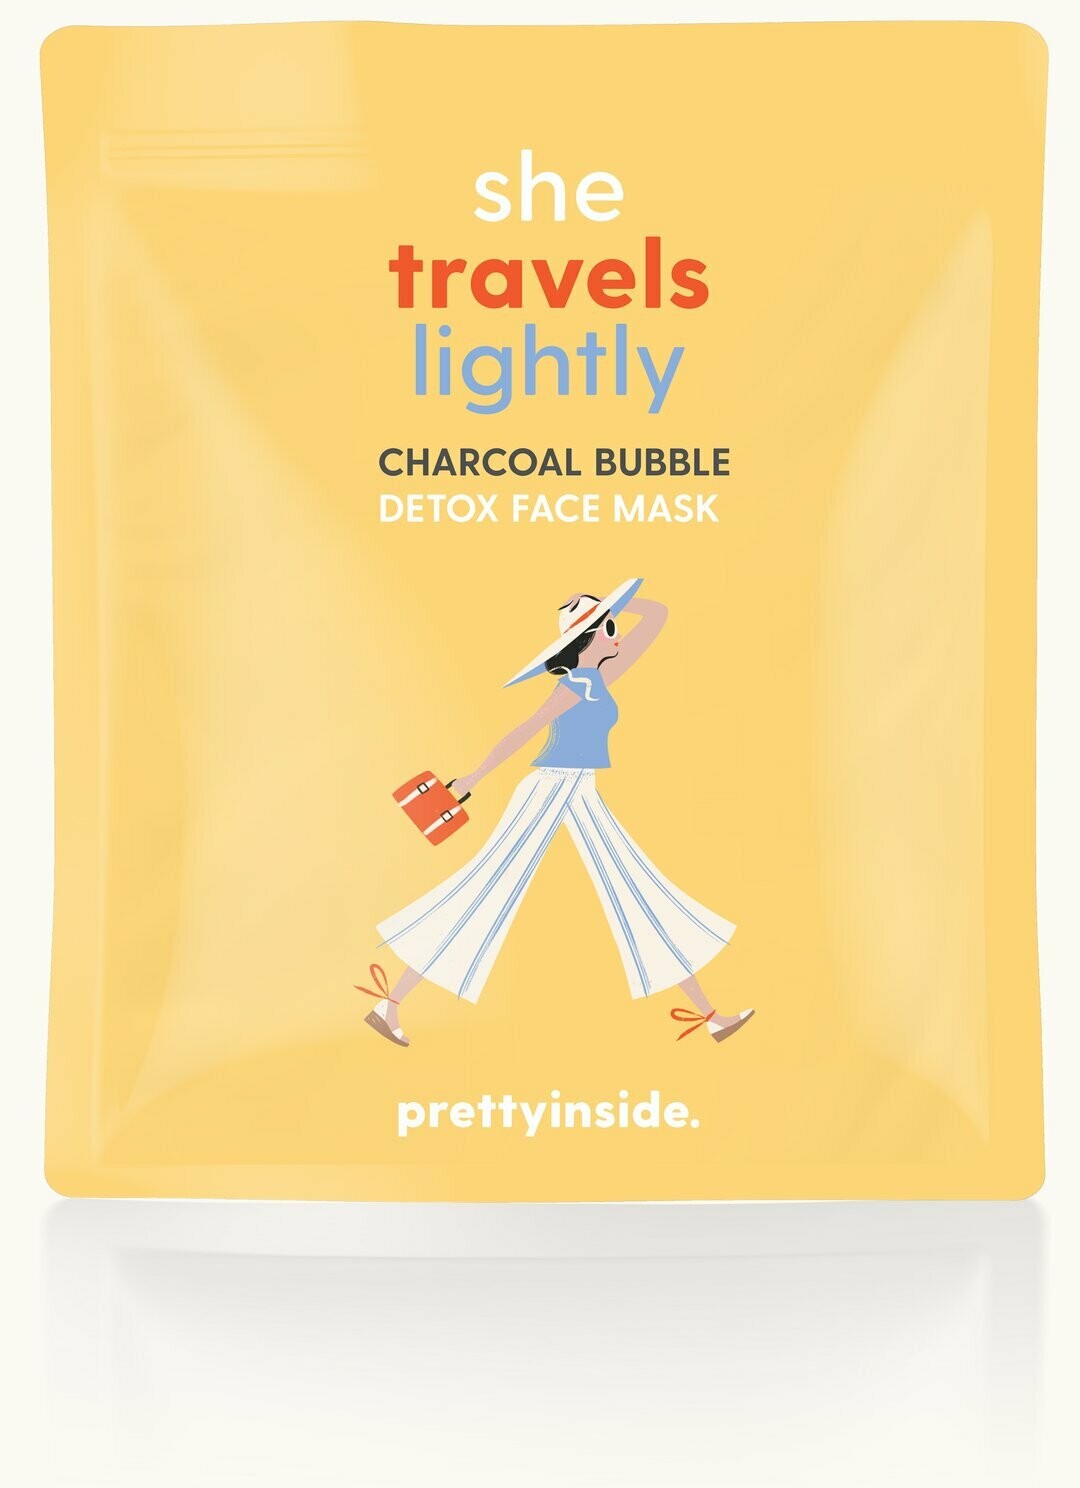 Musee Detox Face Mask - She Travels Lightly Charcoal Bubble